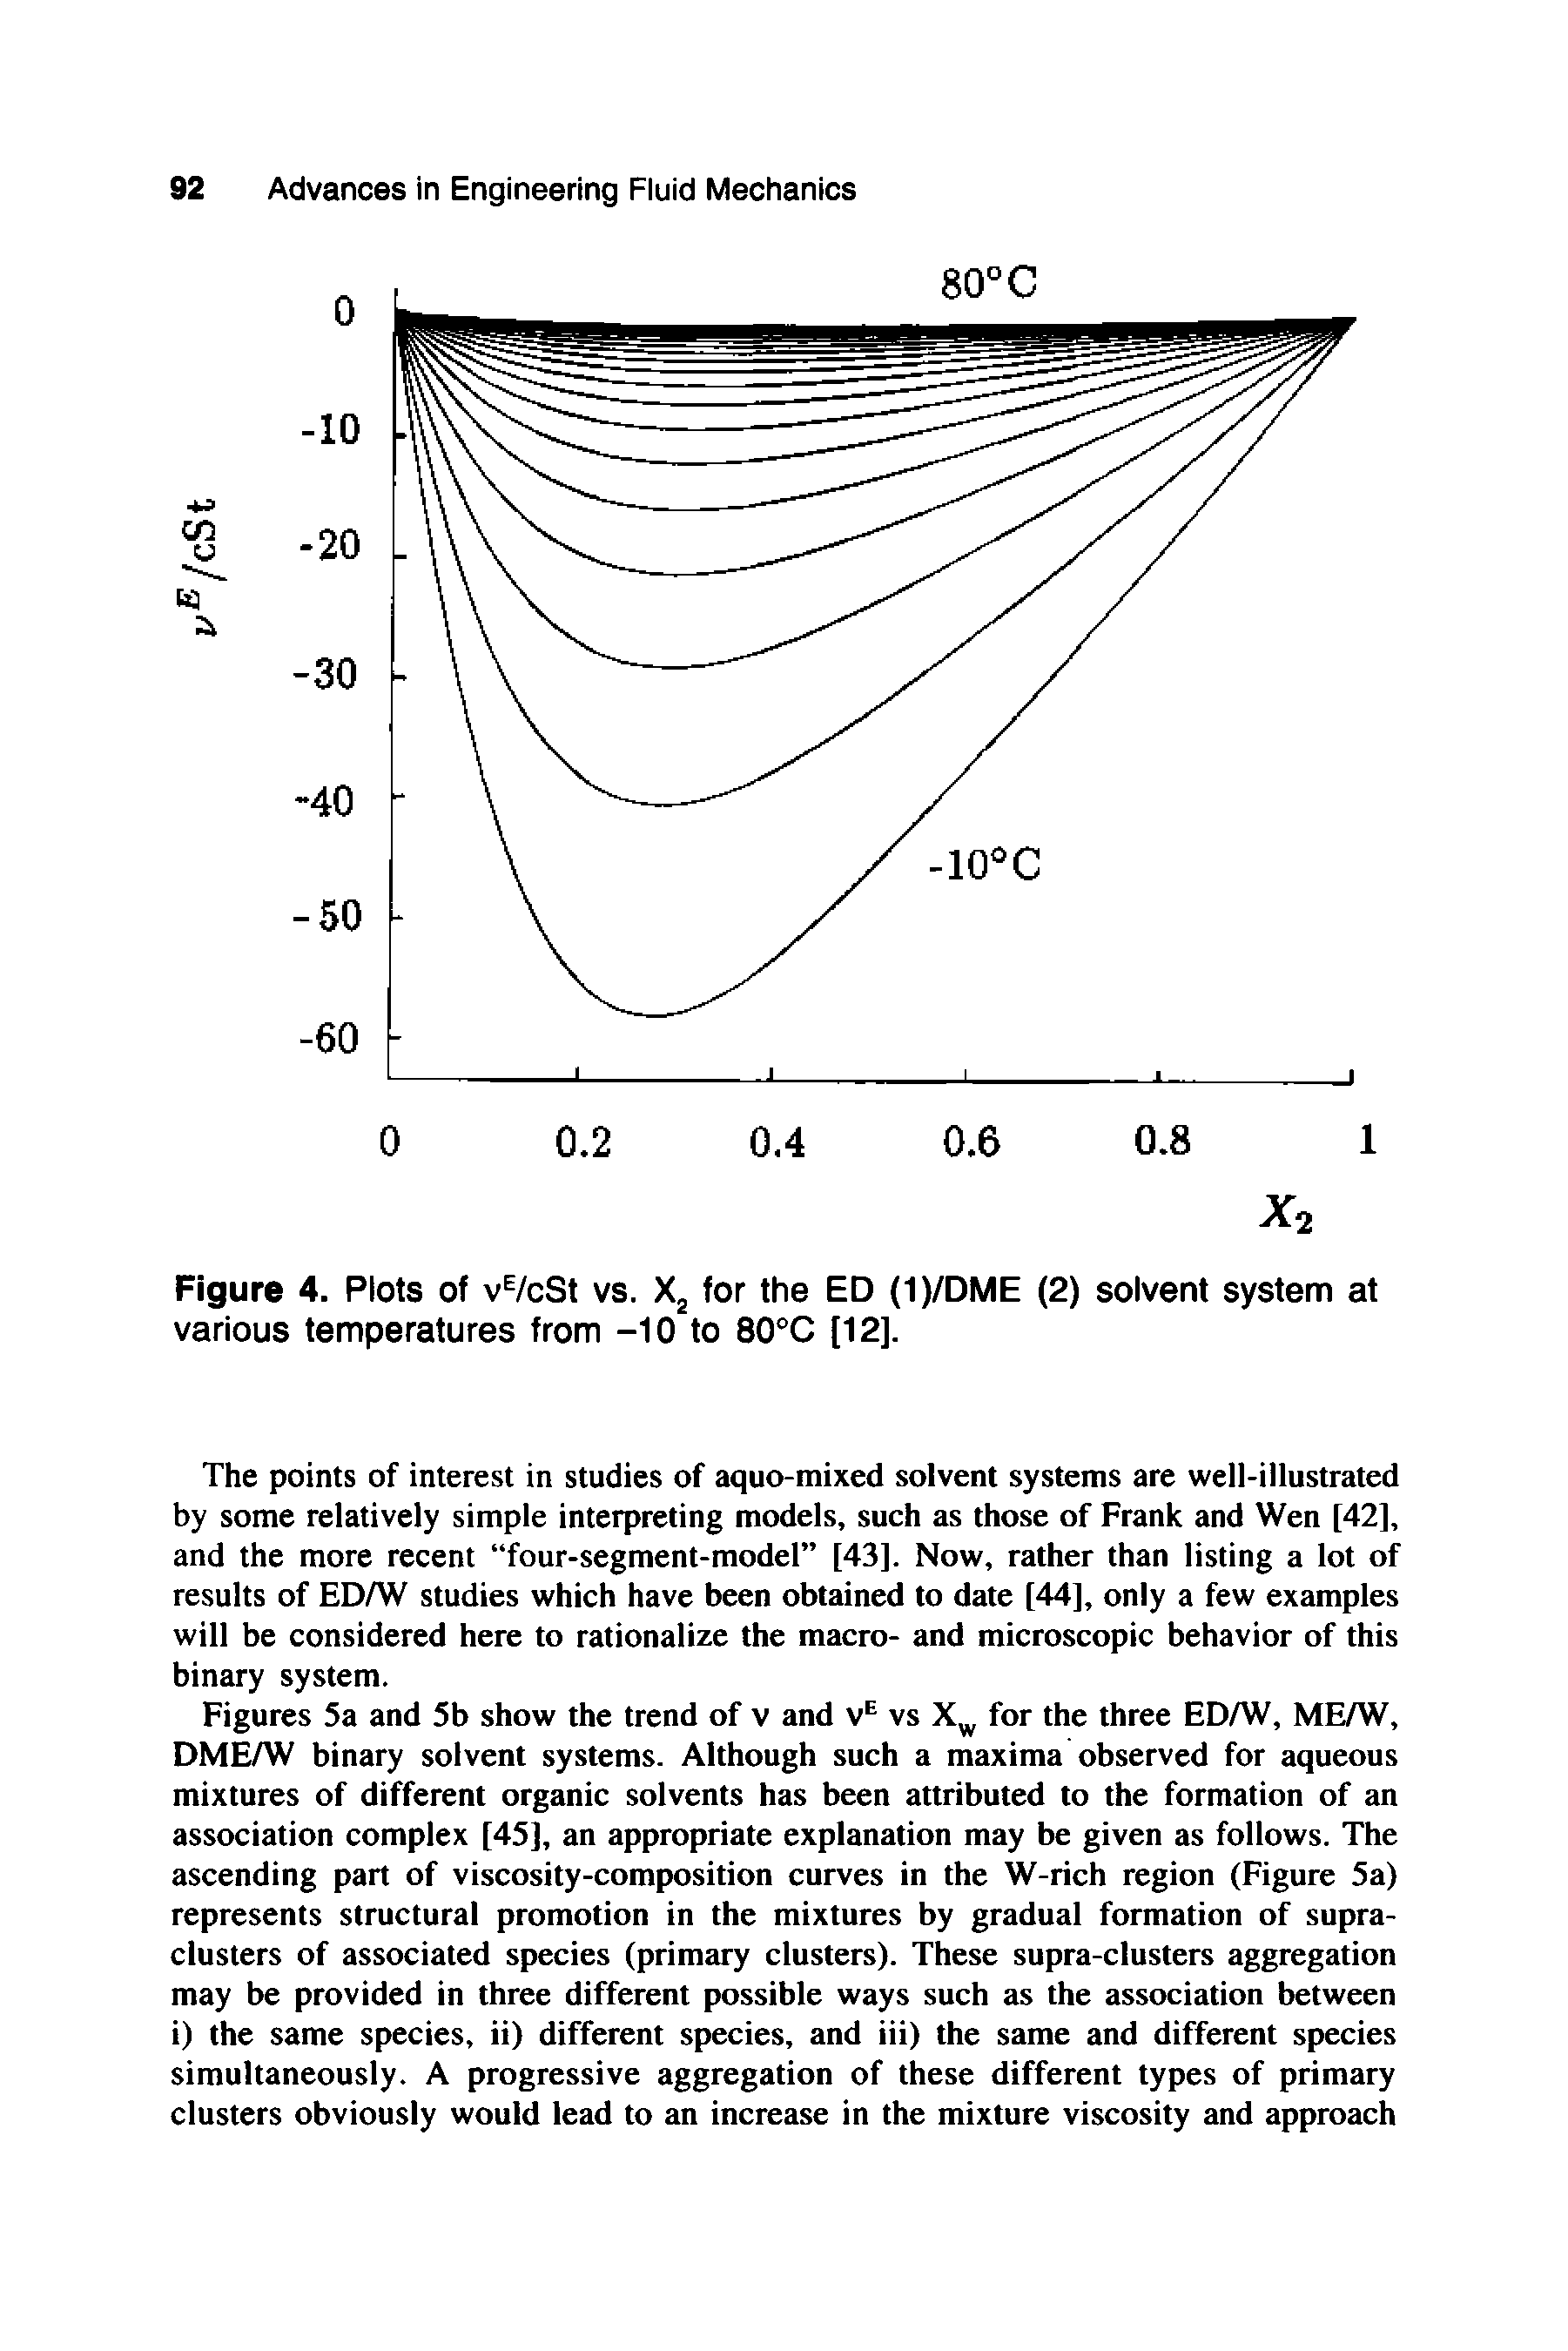 Figures 5a and 5b show the trend of v and v vs for the three ED/W, ME/W, DME/W binary solvent systems. Although such a maxima observed for aqueous mixtures of different organic solvents has been attributed to the formation of an association complex [45], an appropriate explanation may be given as follows. The ascending part of viscosity-composition curves in the W-rich region (Figure 5a) represents structural promotion in the mixtures by gradual formation of supra-clusters of associated species (primeu y clusters). These supra-clusters aggregation may be provided in three different possible ways such as the association between i) the same species, ii) different species, and iii) the same and different species simultaneously. A progressive aggregation of these different types of primary clusters obviously would lead to an increase in the mixture viscosity and approach...